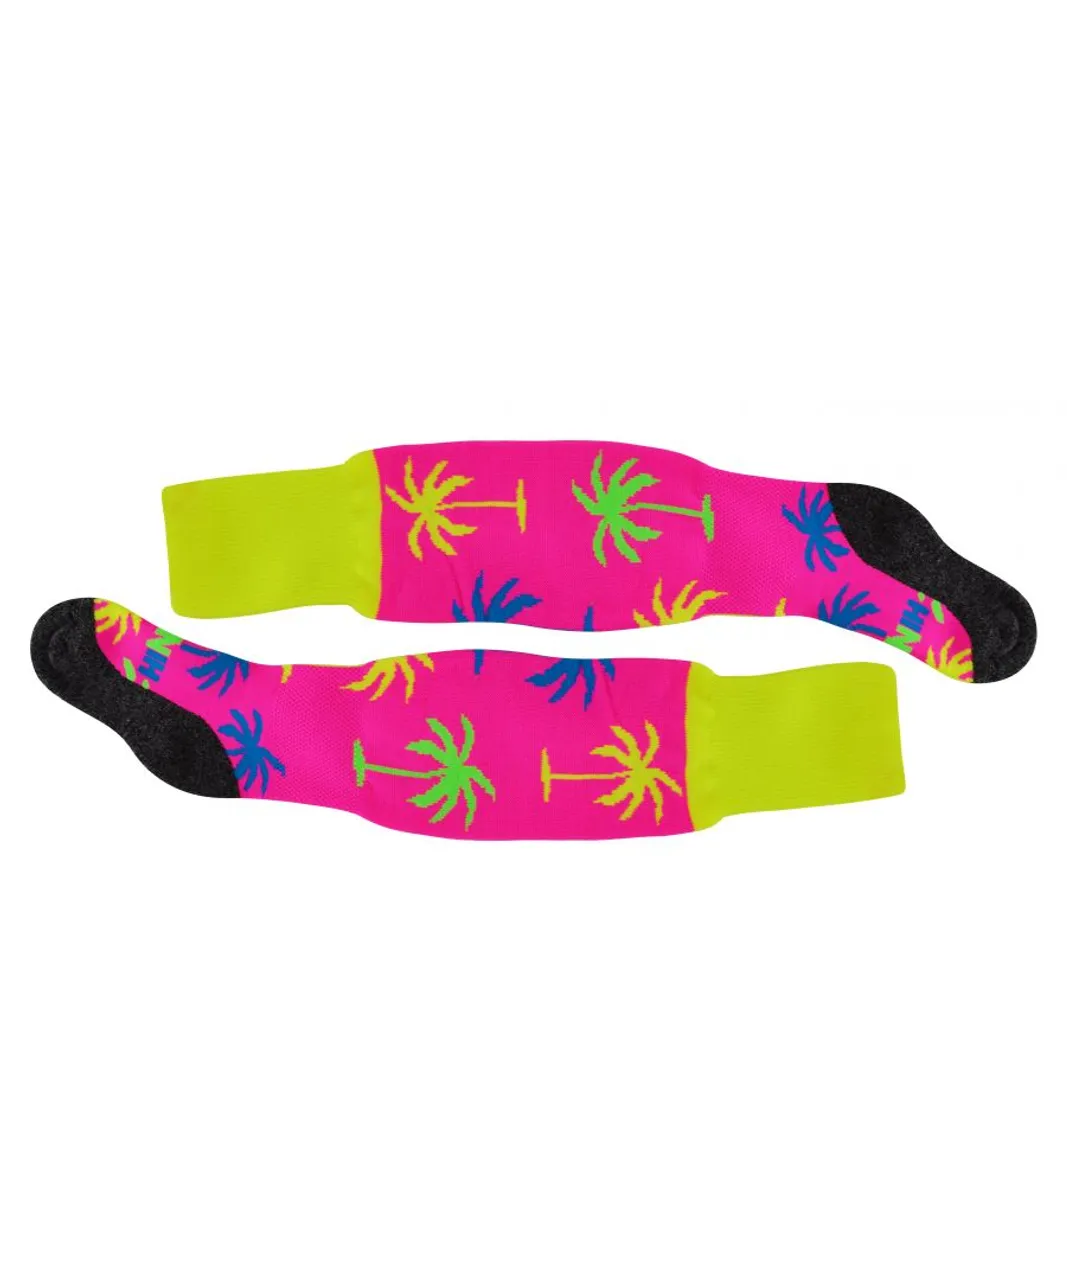 Hingly Womens Hockey Socks with Colourful Cool Funny Funky Designs